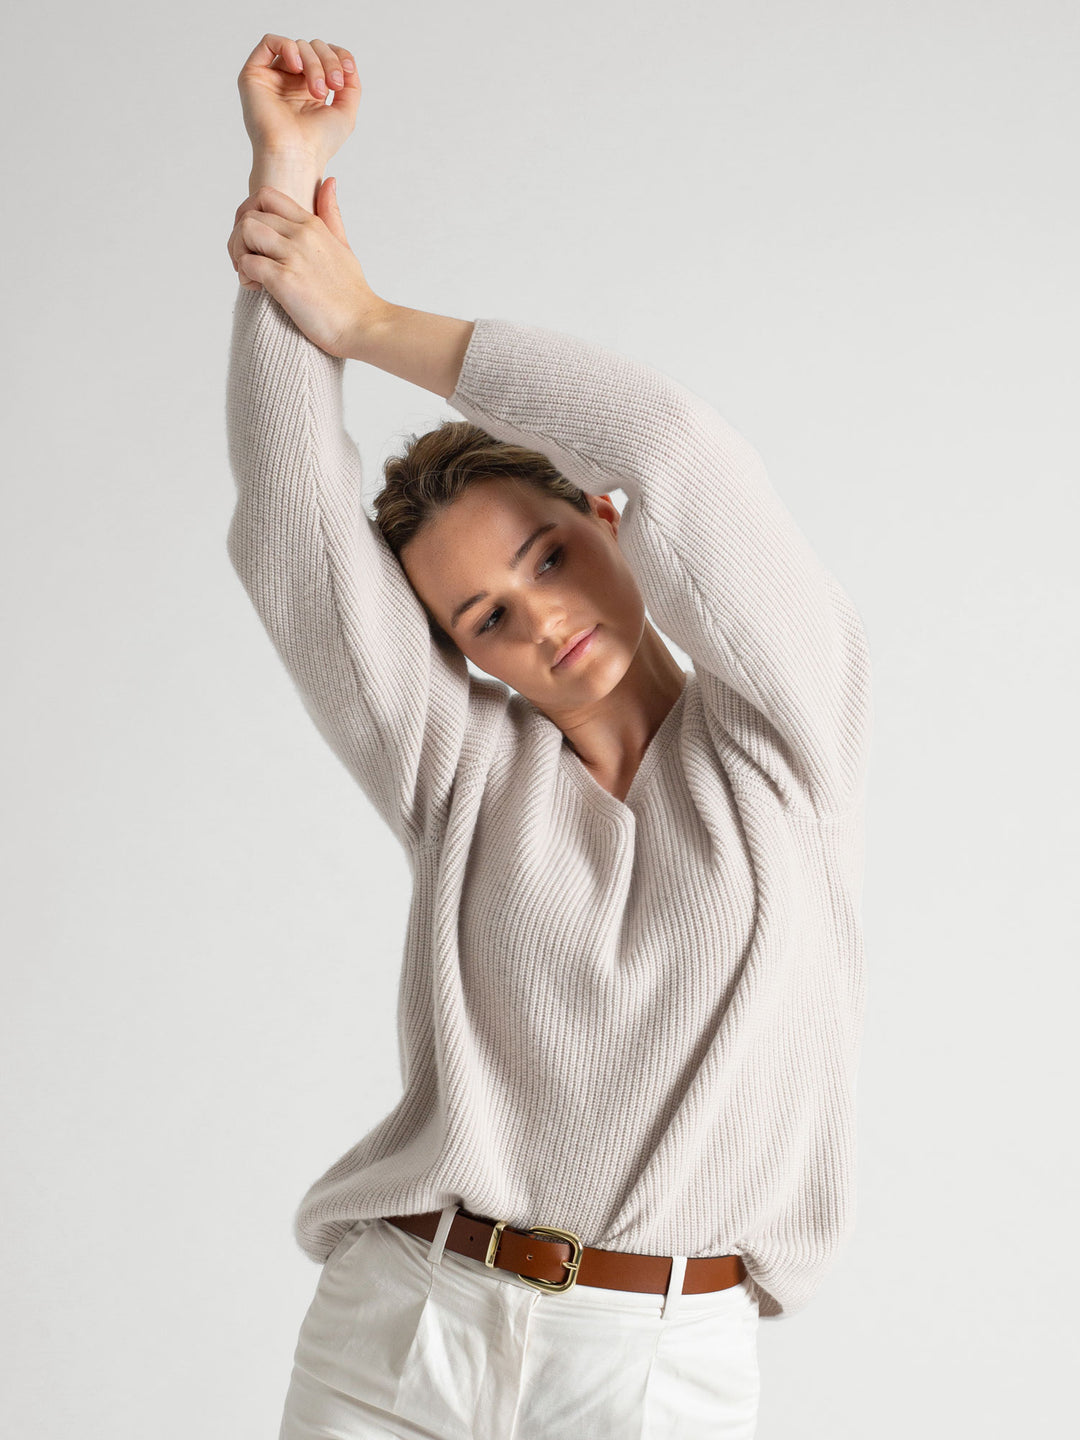 Rib knitted V-neck cashmere sweater in color: Cold Creme. 100% cashmere, Scandinavian design by Kashmina.Rib knitted V-neck cashmere sweater in color: Cold Creme. 100% cashmere, Scandinavian design by Kashmina.